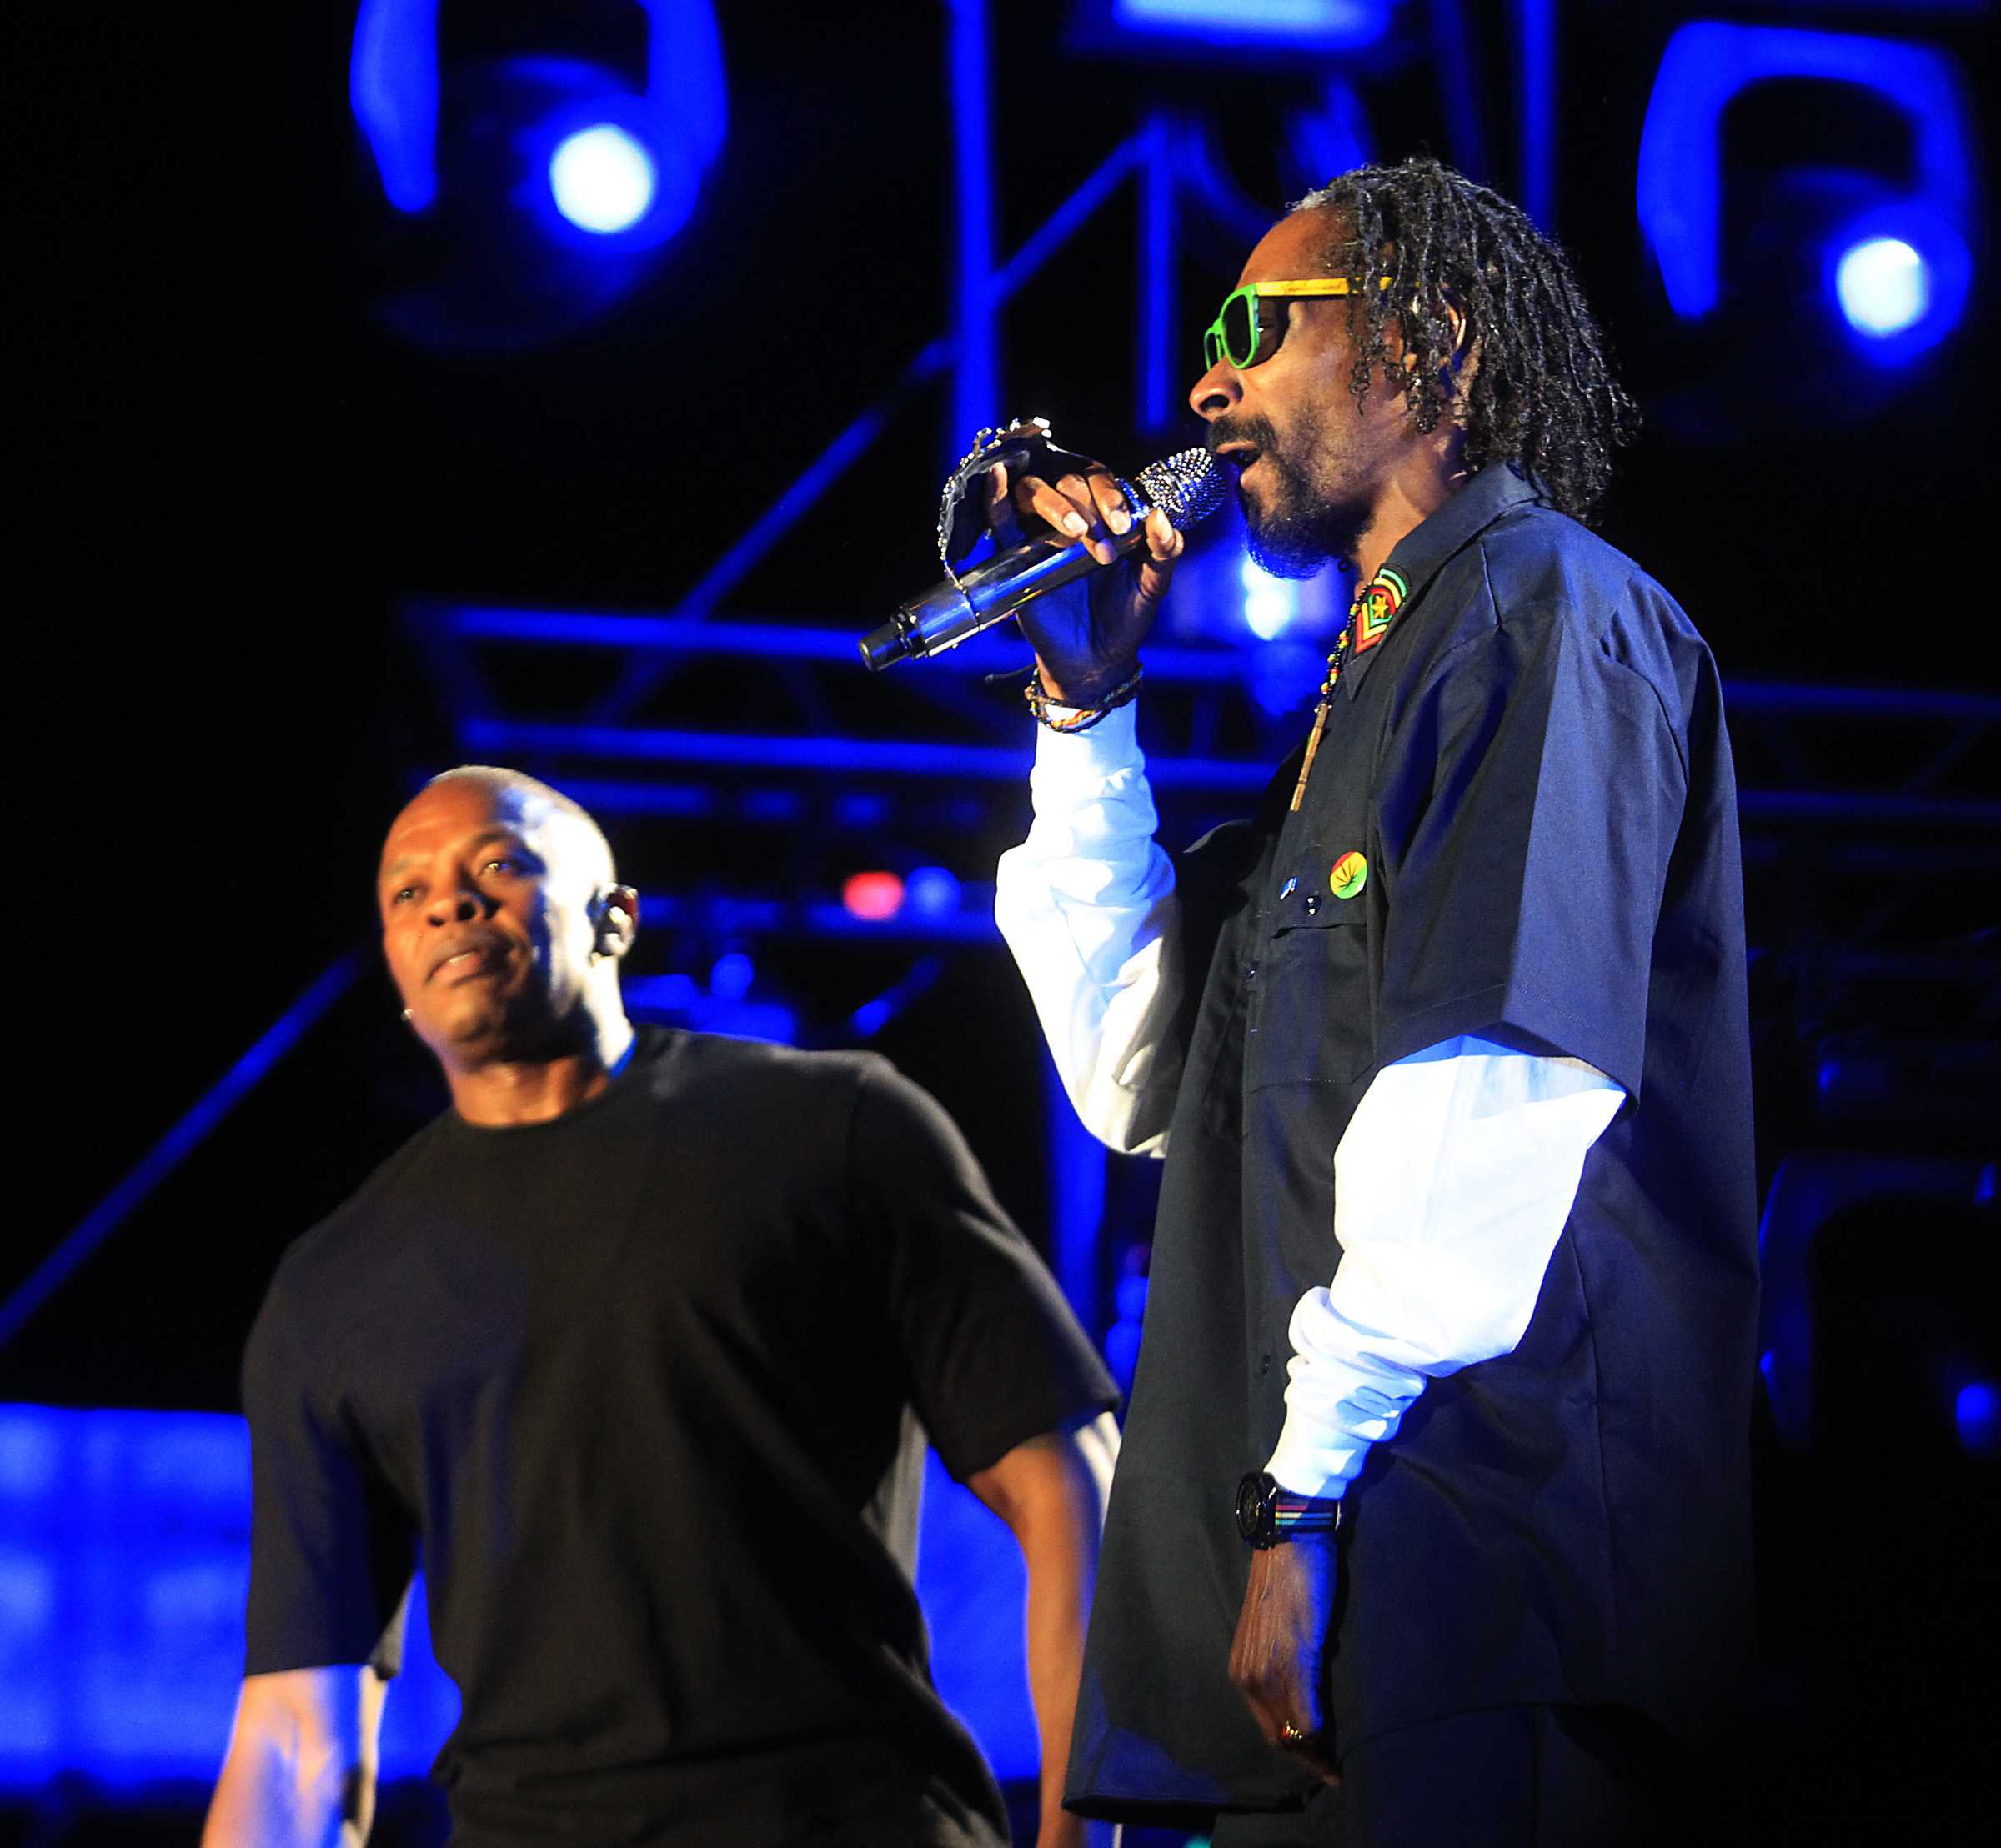 Snoop+Dogg+and+Dr.+Dre+pictured+performing+at+coachella